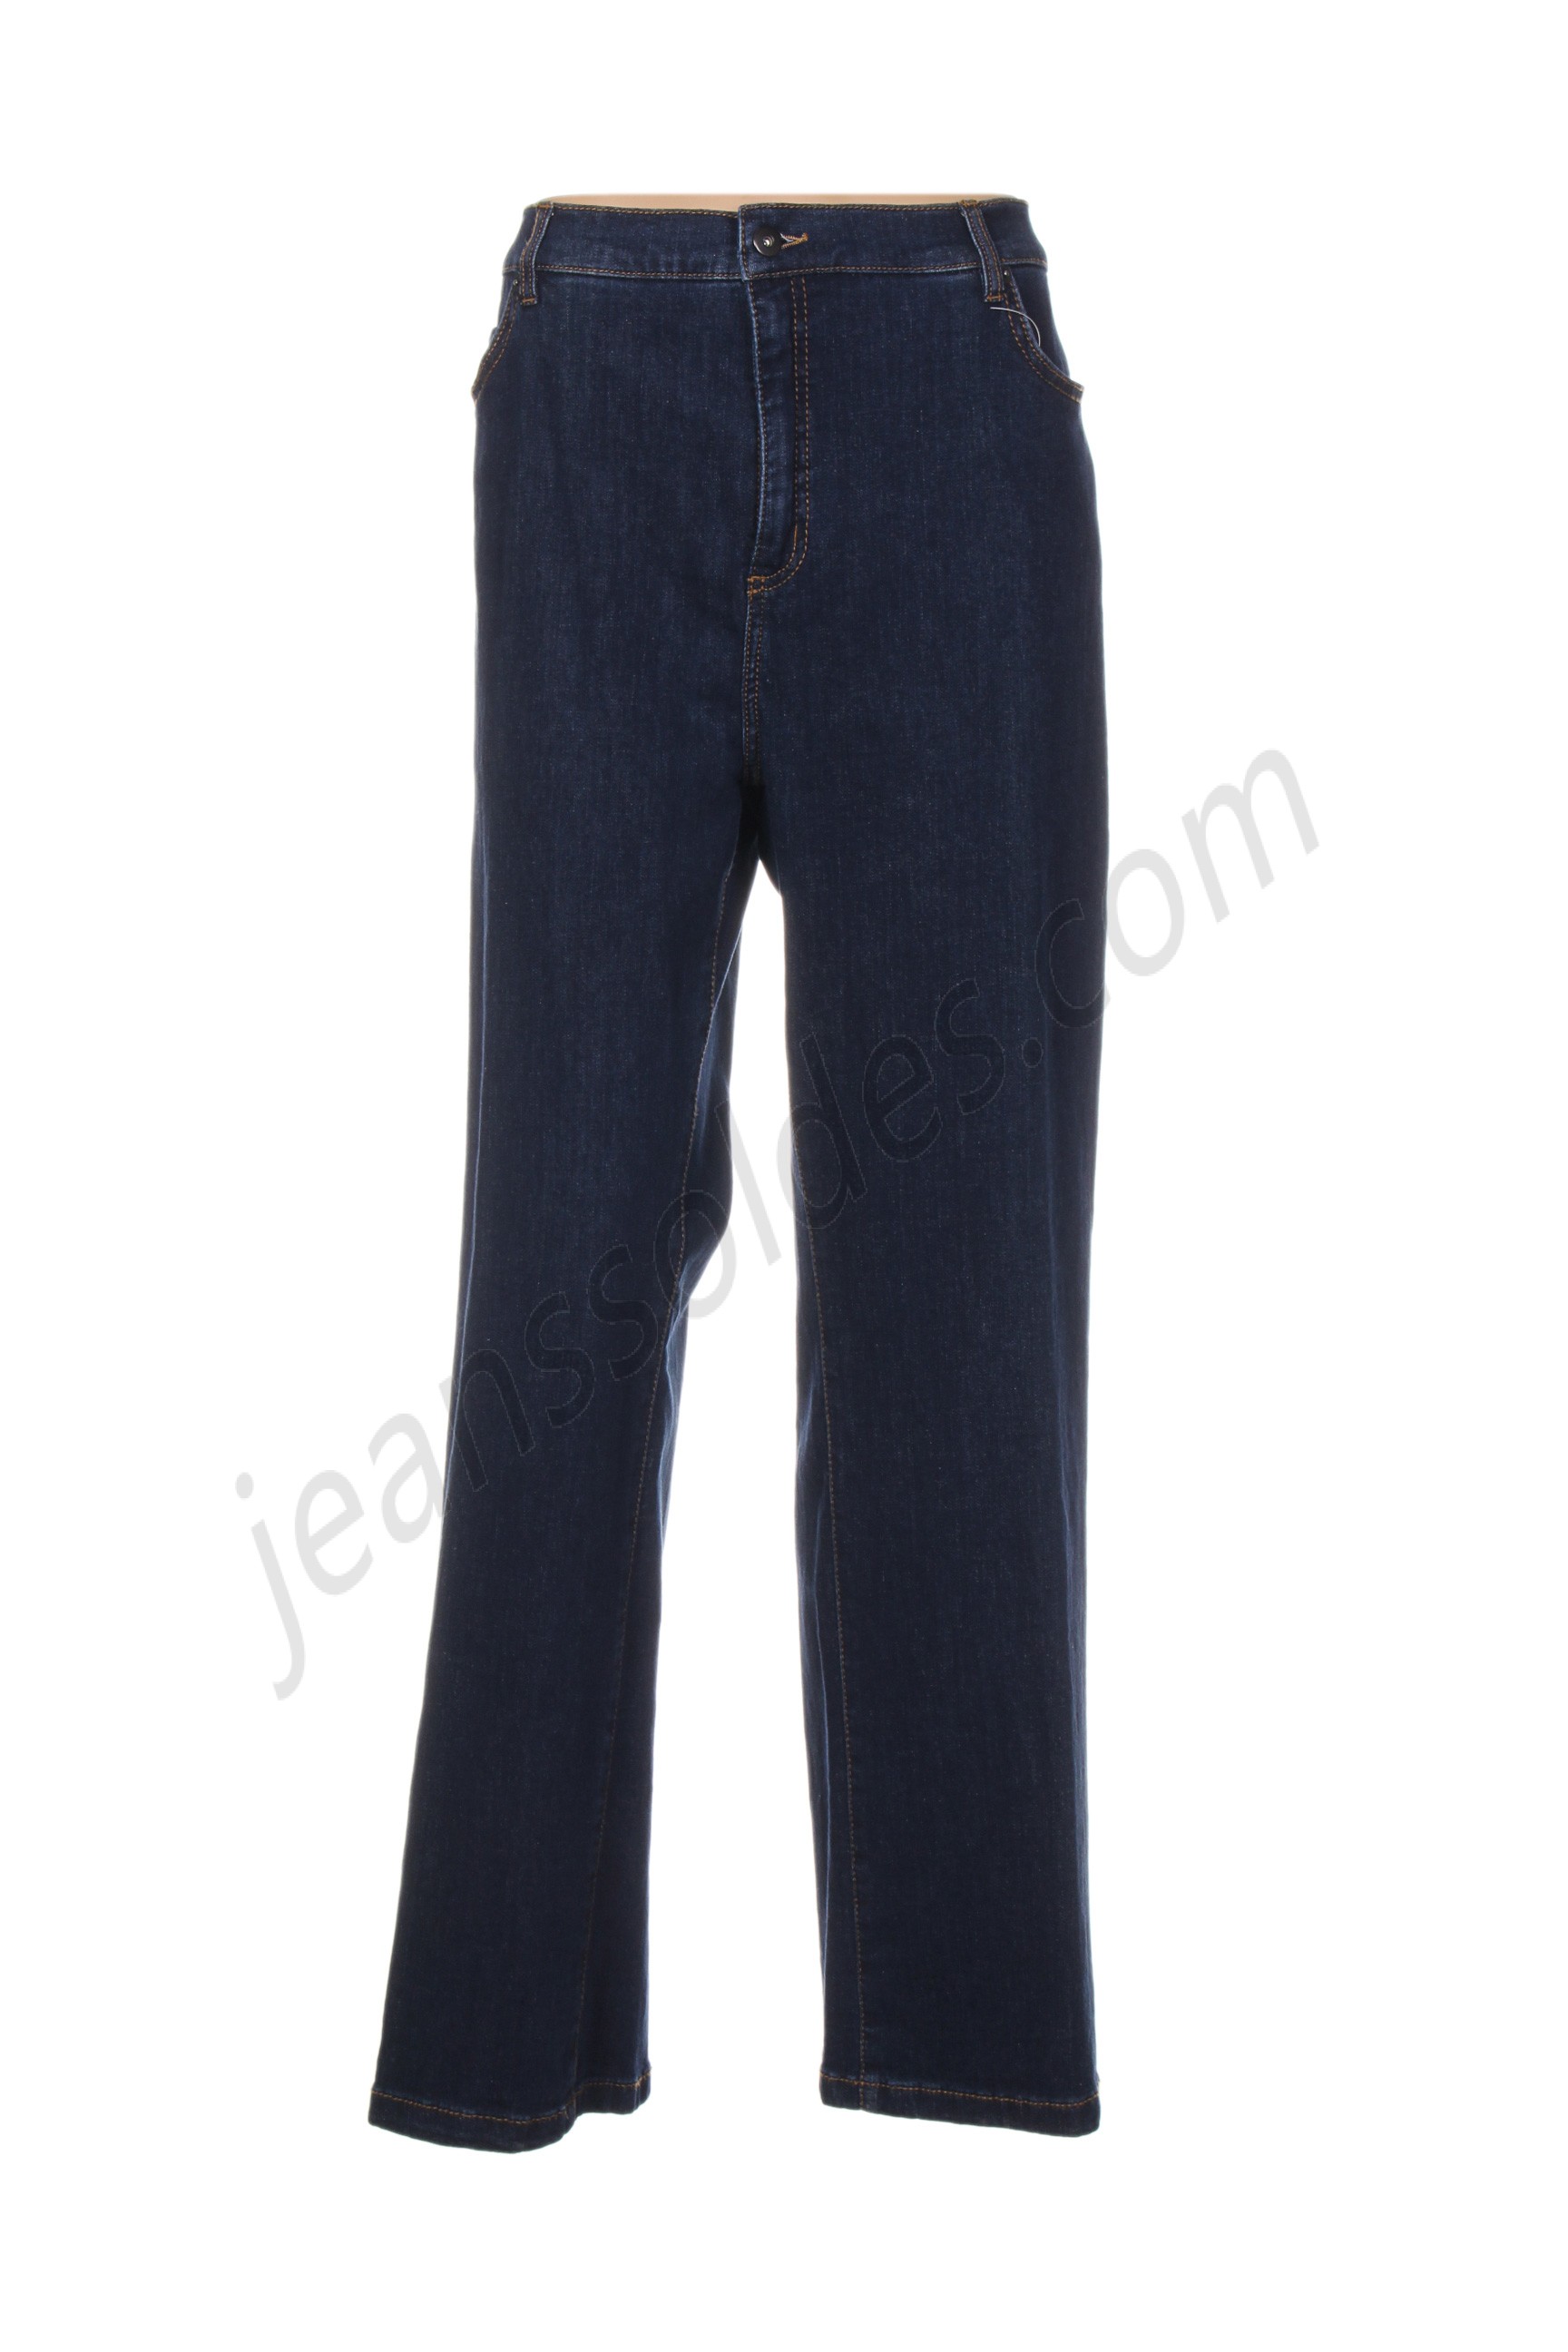 gelco-Jeans coupe droite prix d’amis - gelco-Jeans coupe droite prix d’amis